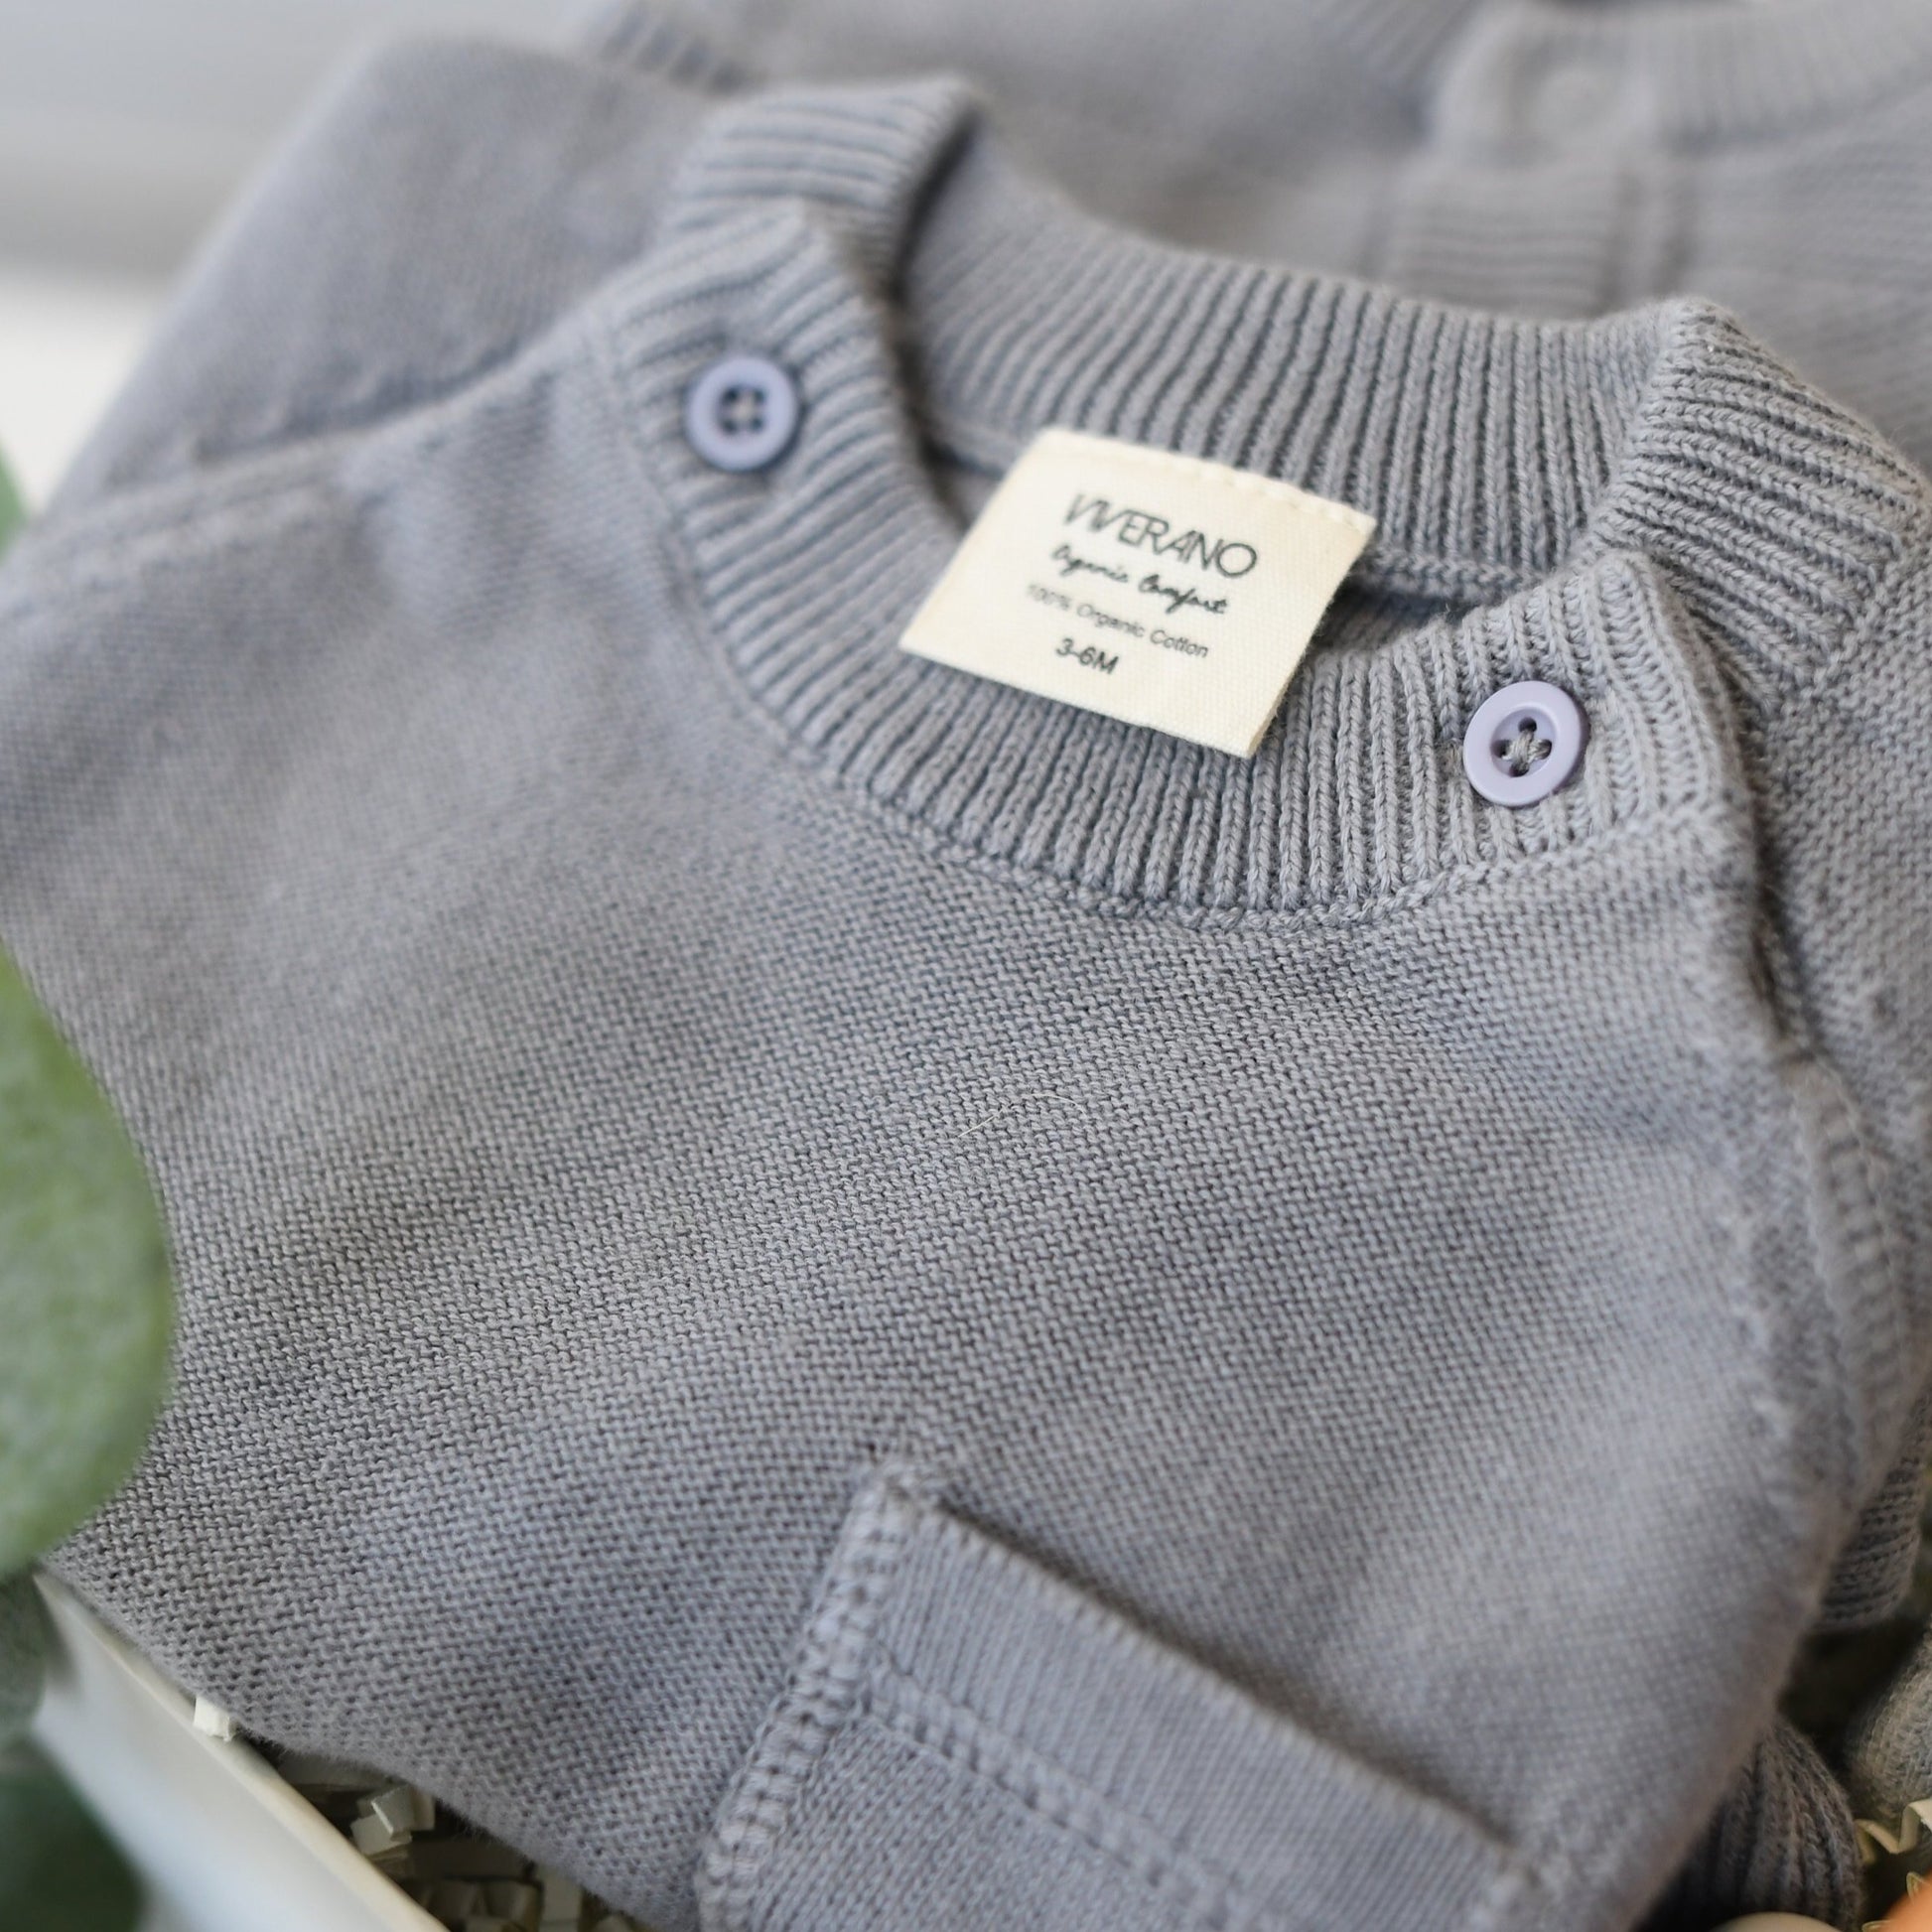 knit pullover baby sweater in gray made by Viverano